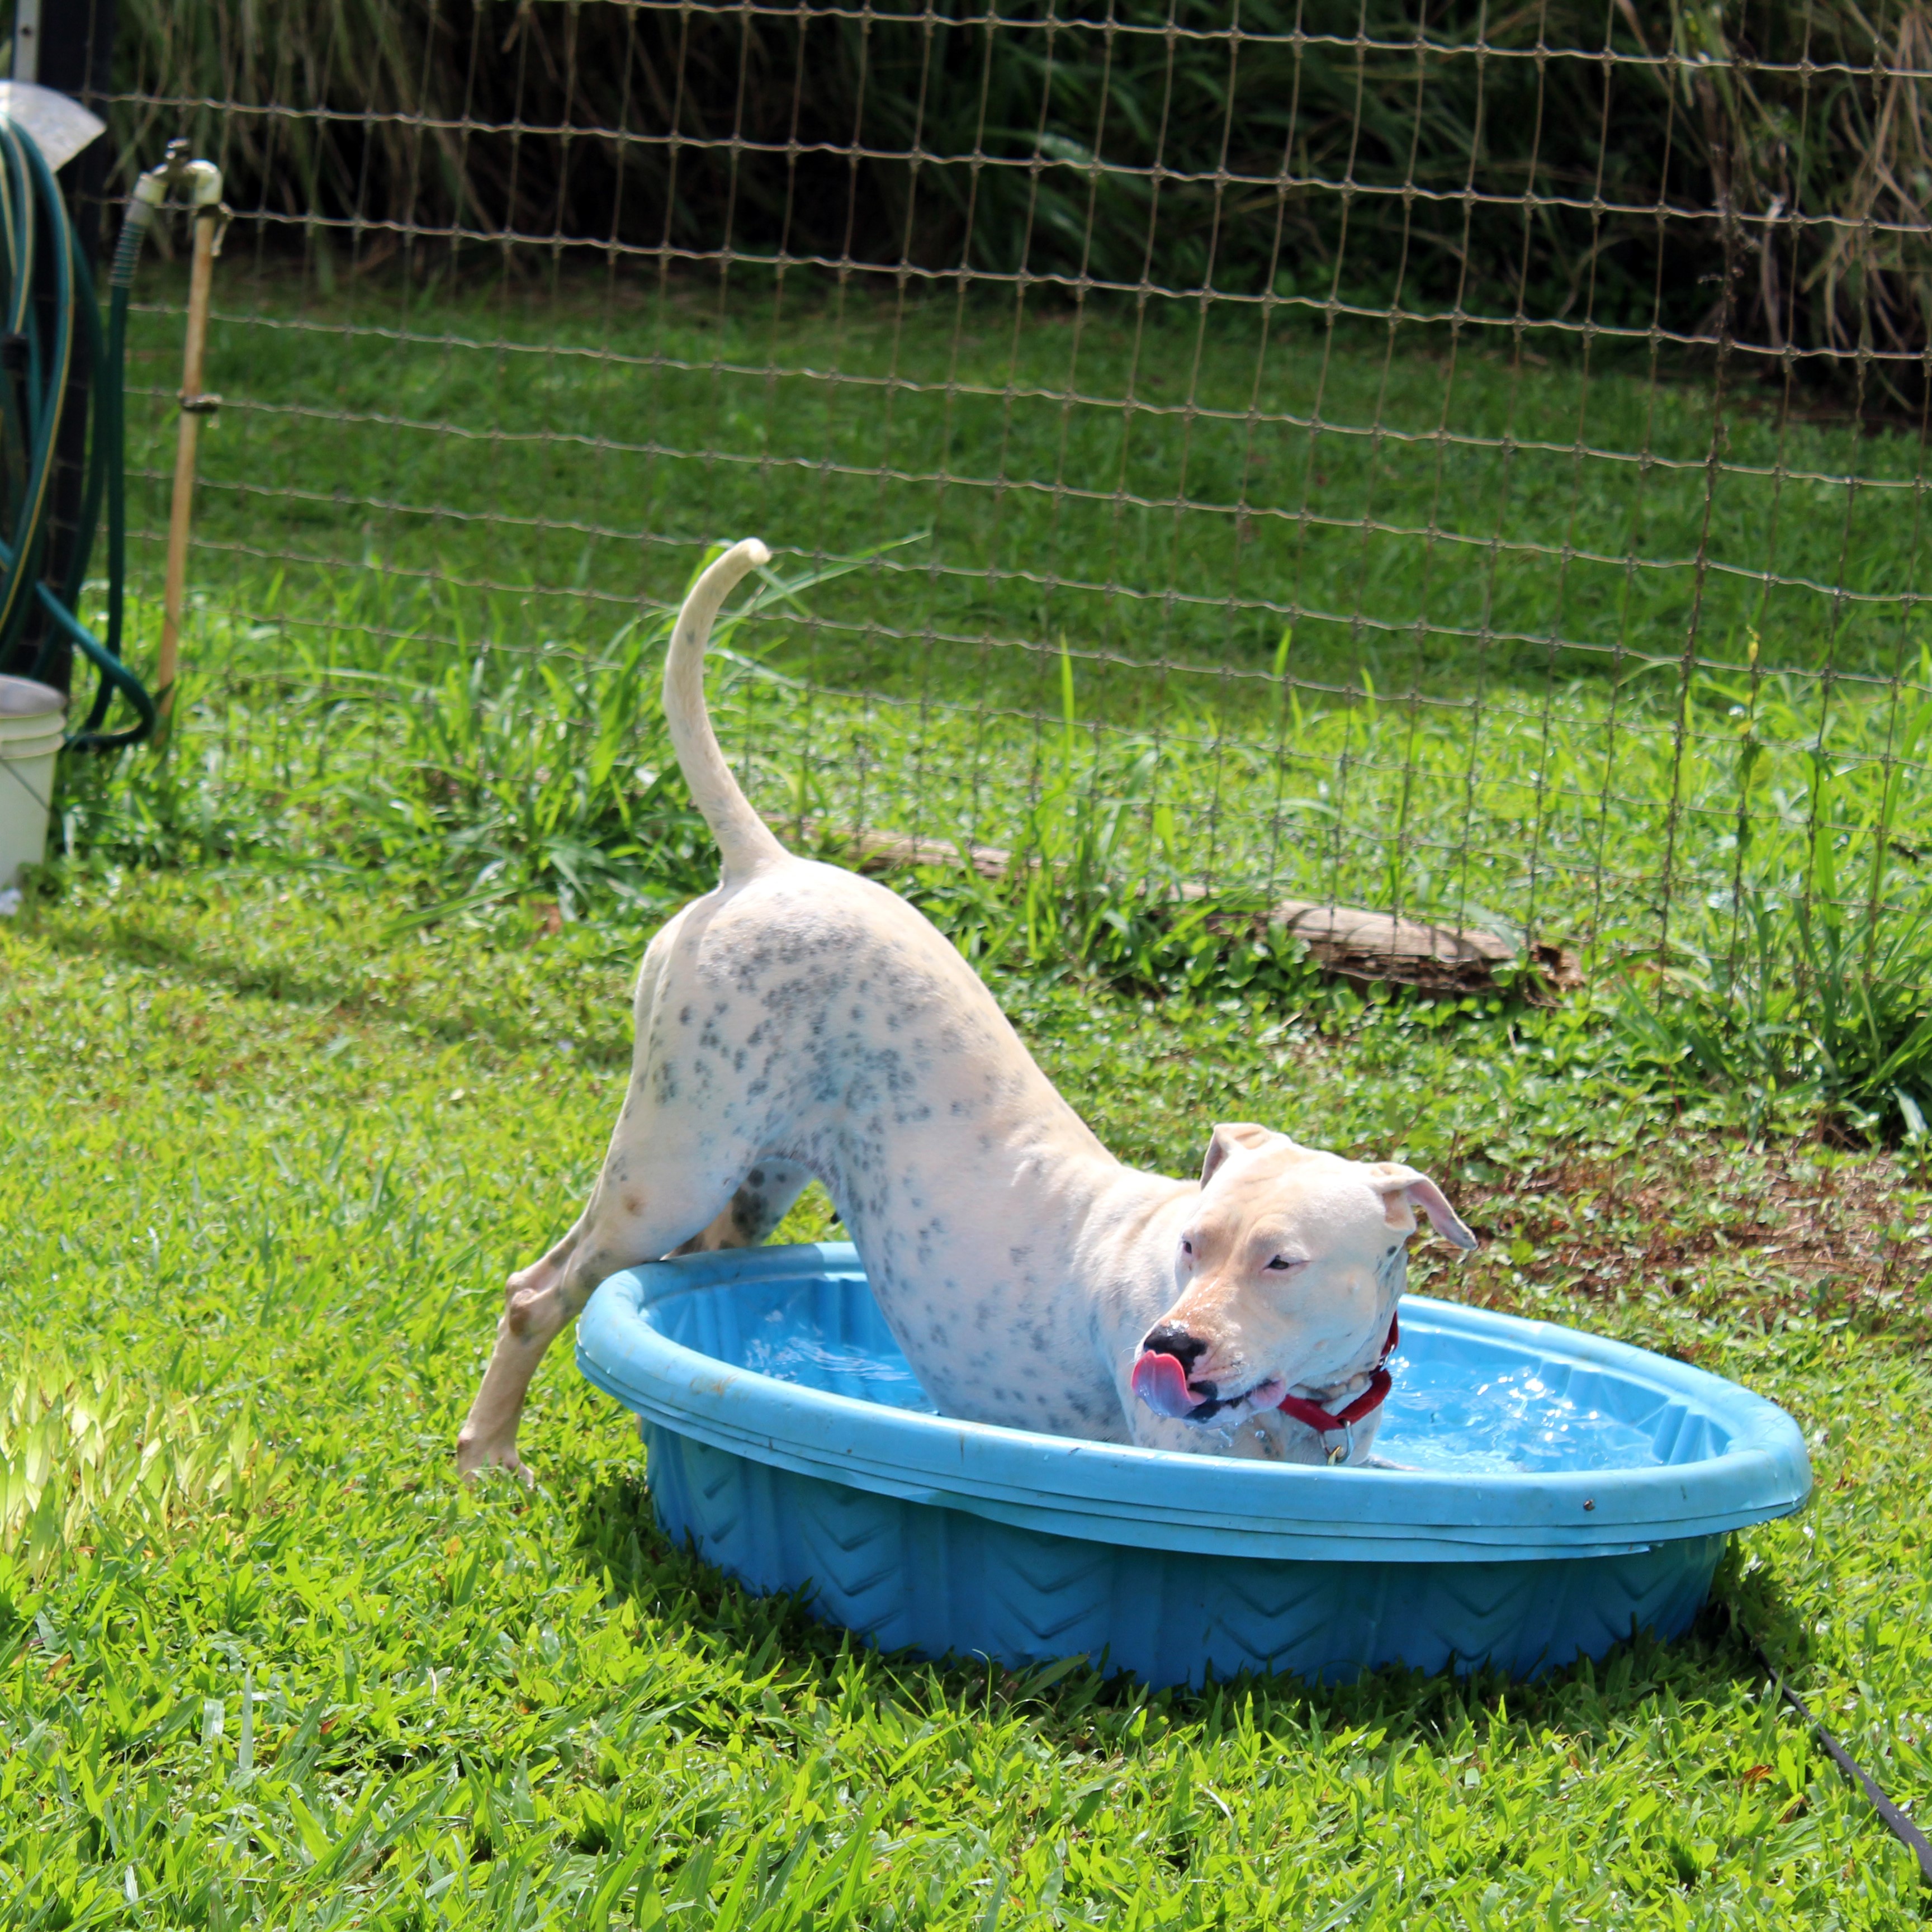 Stella loves to play in the pool.